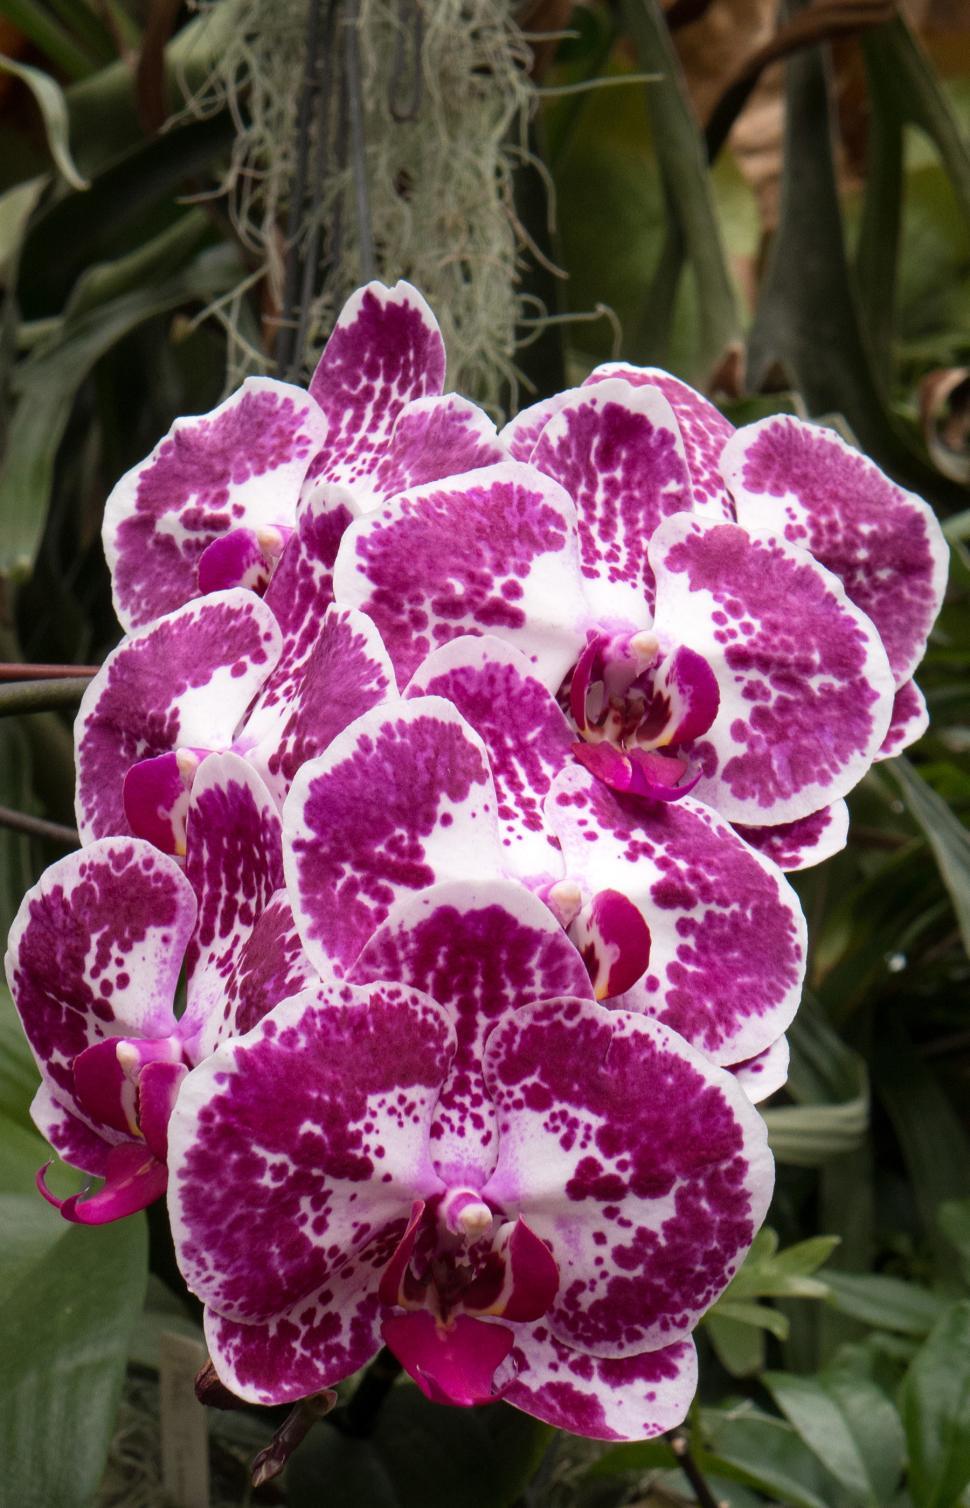 Free Image of Cluster of Maroon Moth Orchid Flowers 